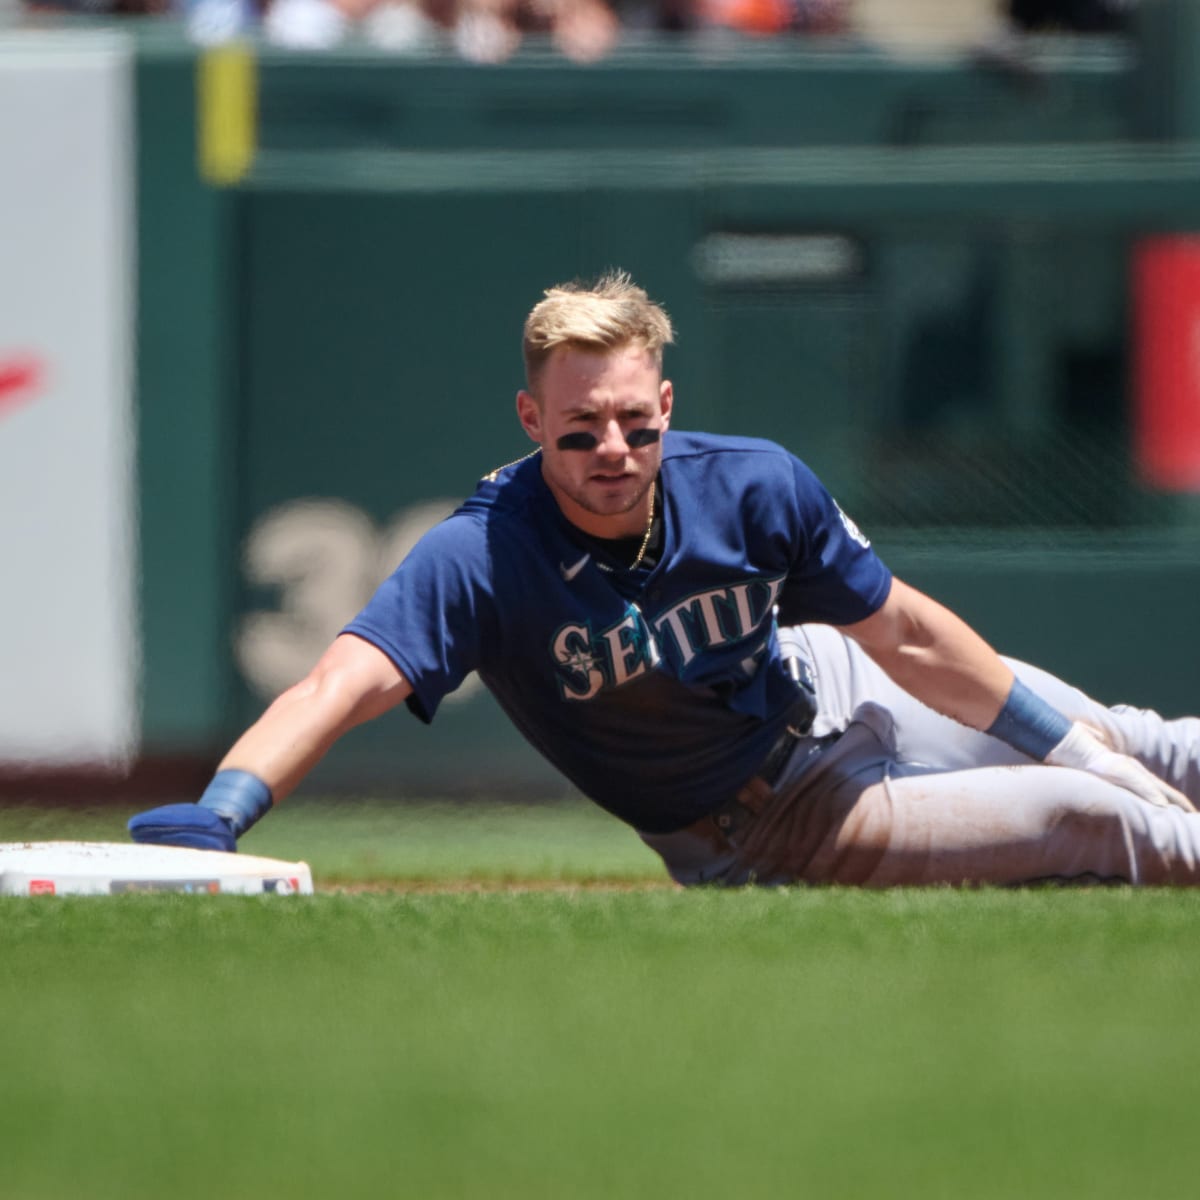 Mariners Intrasquad Game 4 Notes: it's the Jarred Kelenic show